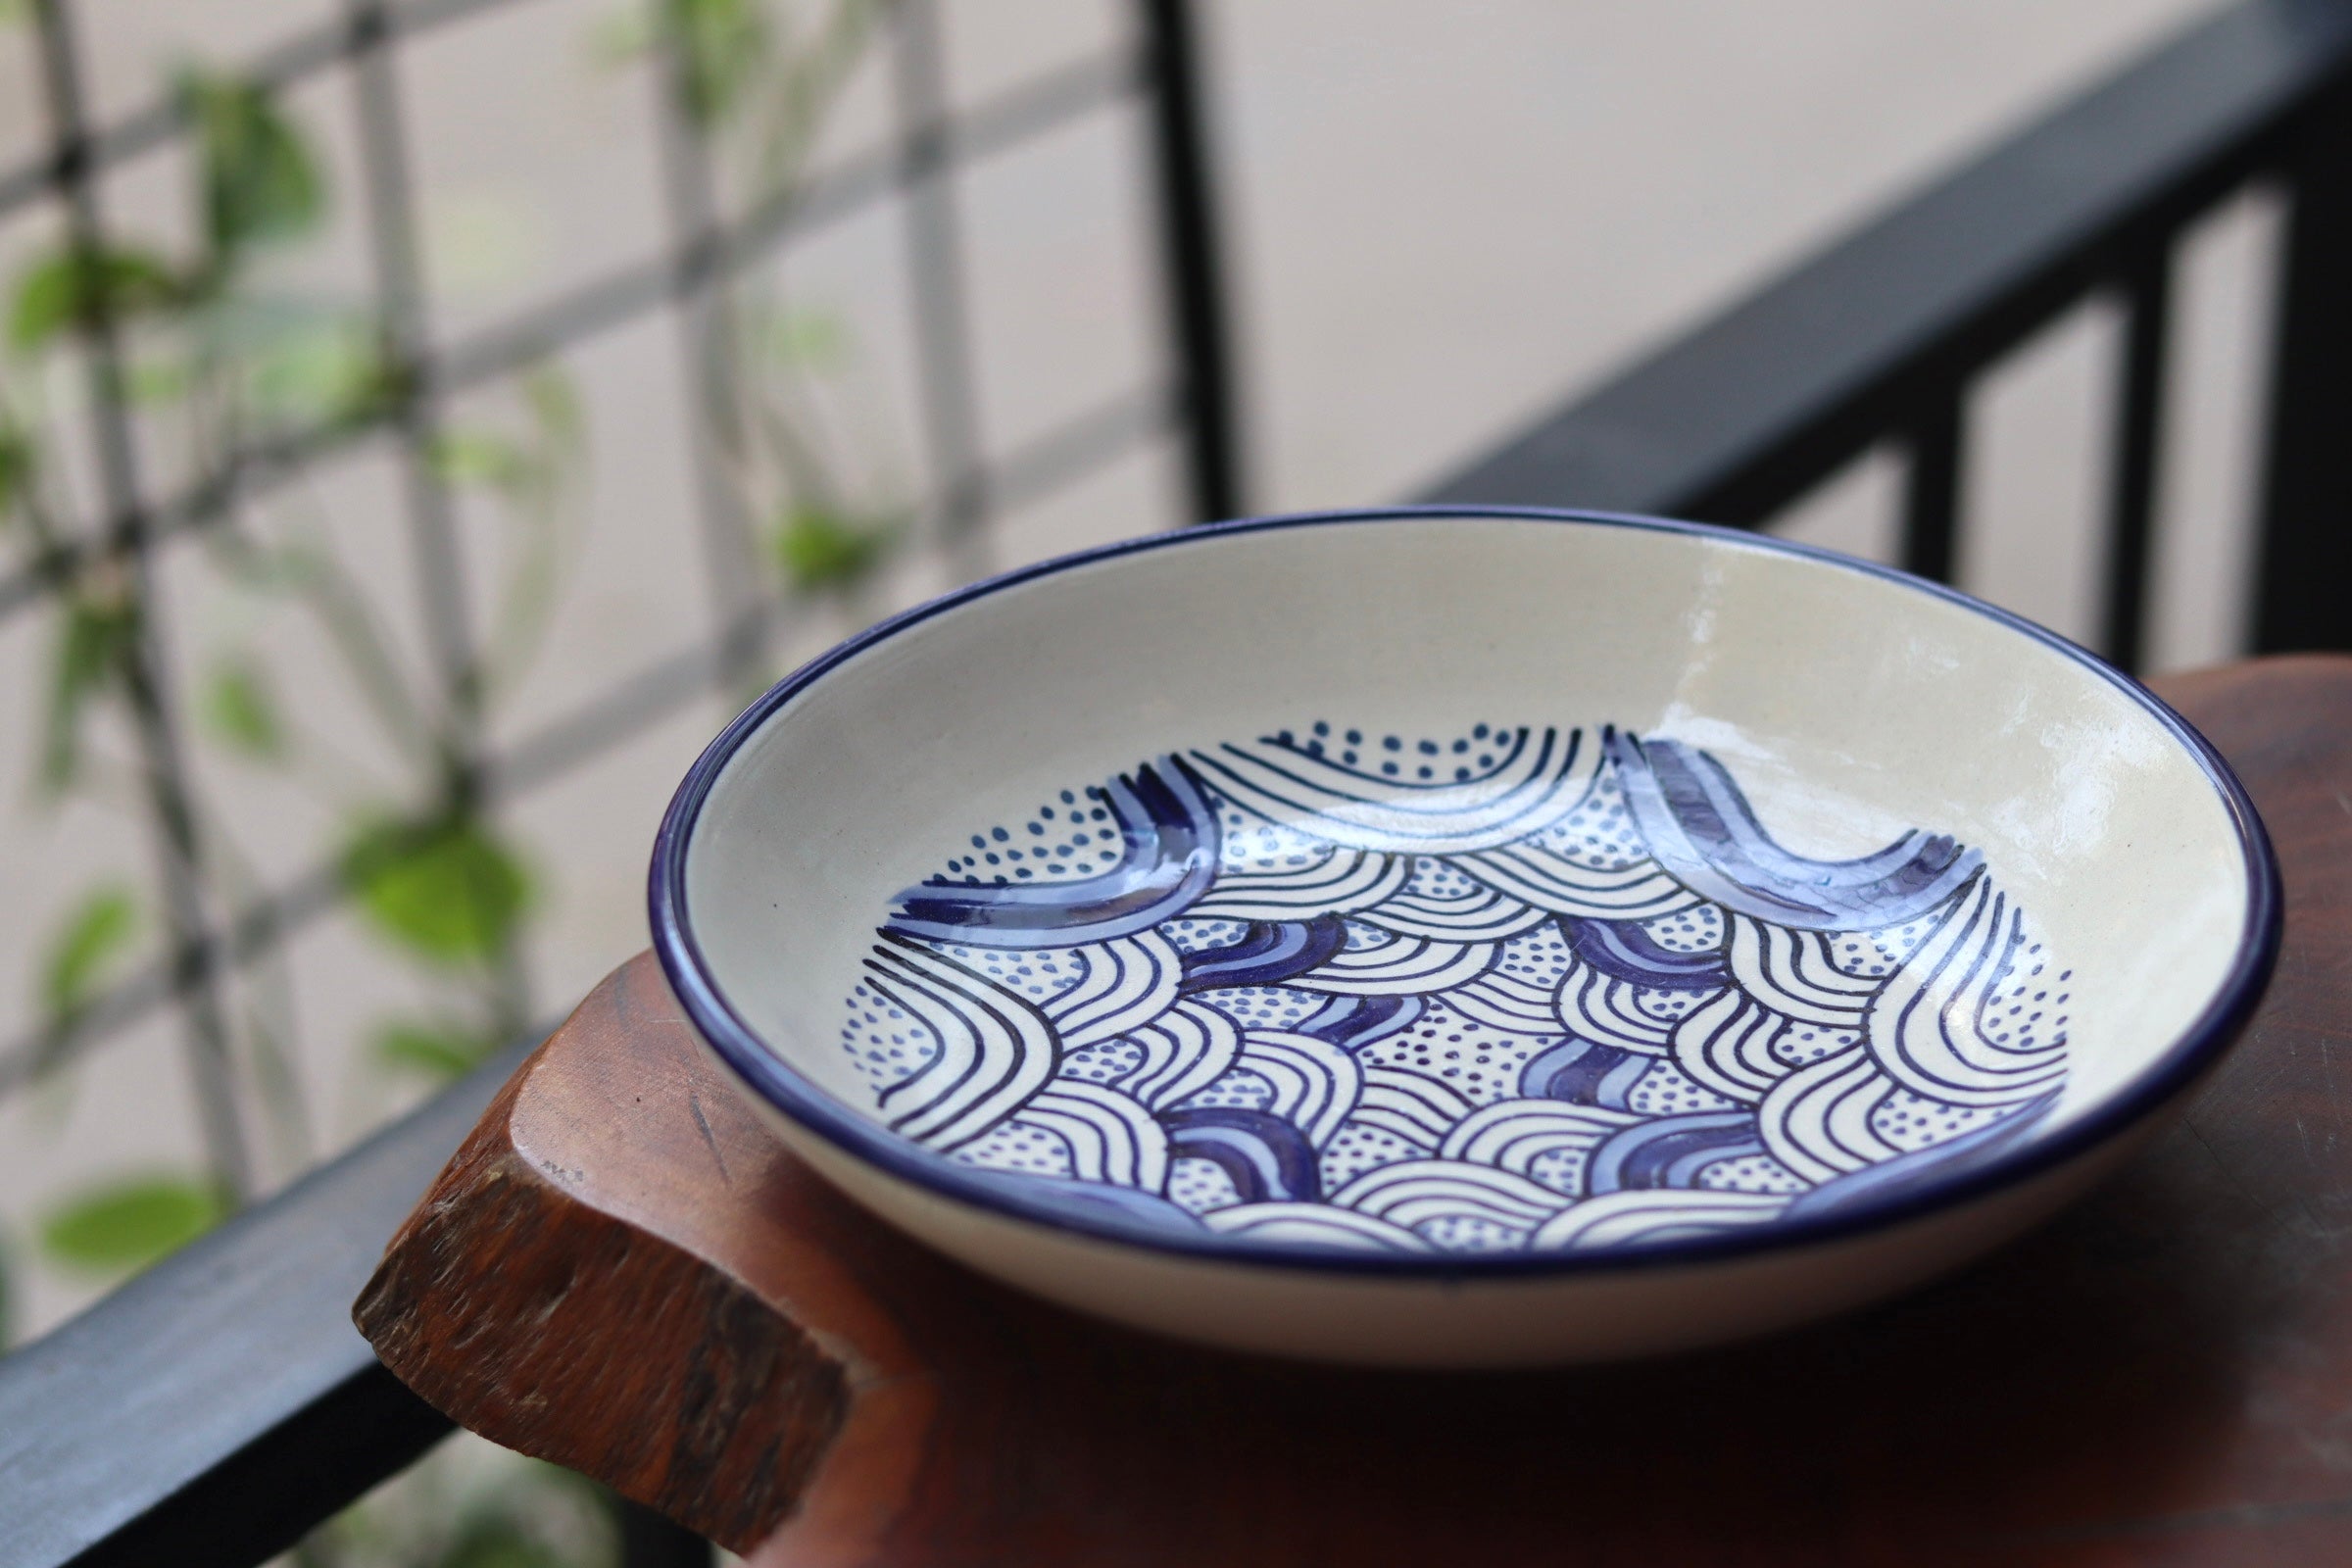 White & blue wavy pasta plate on wooden surface